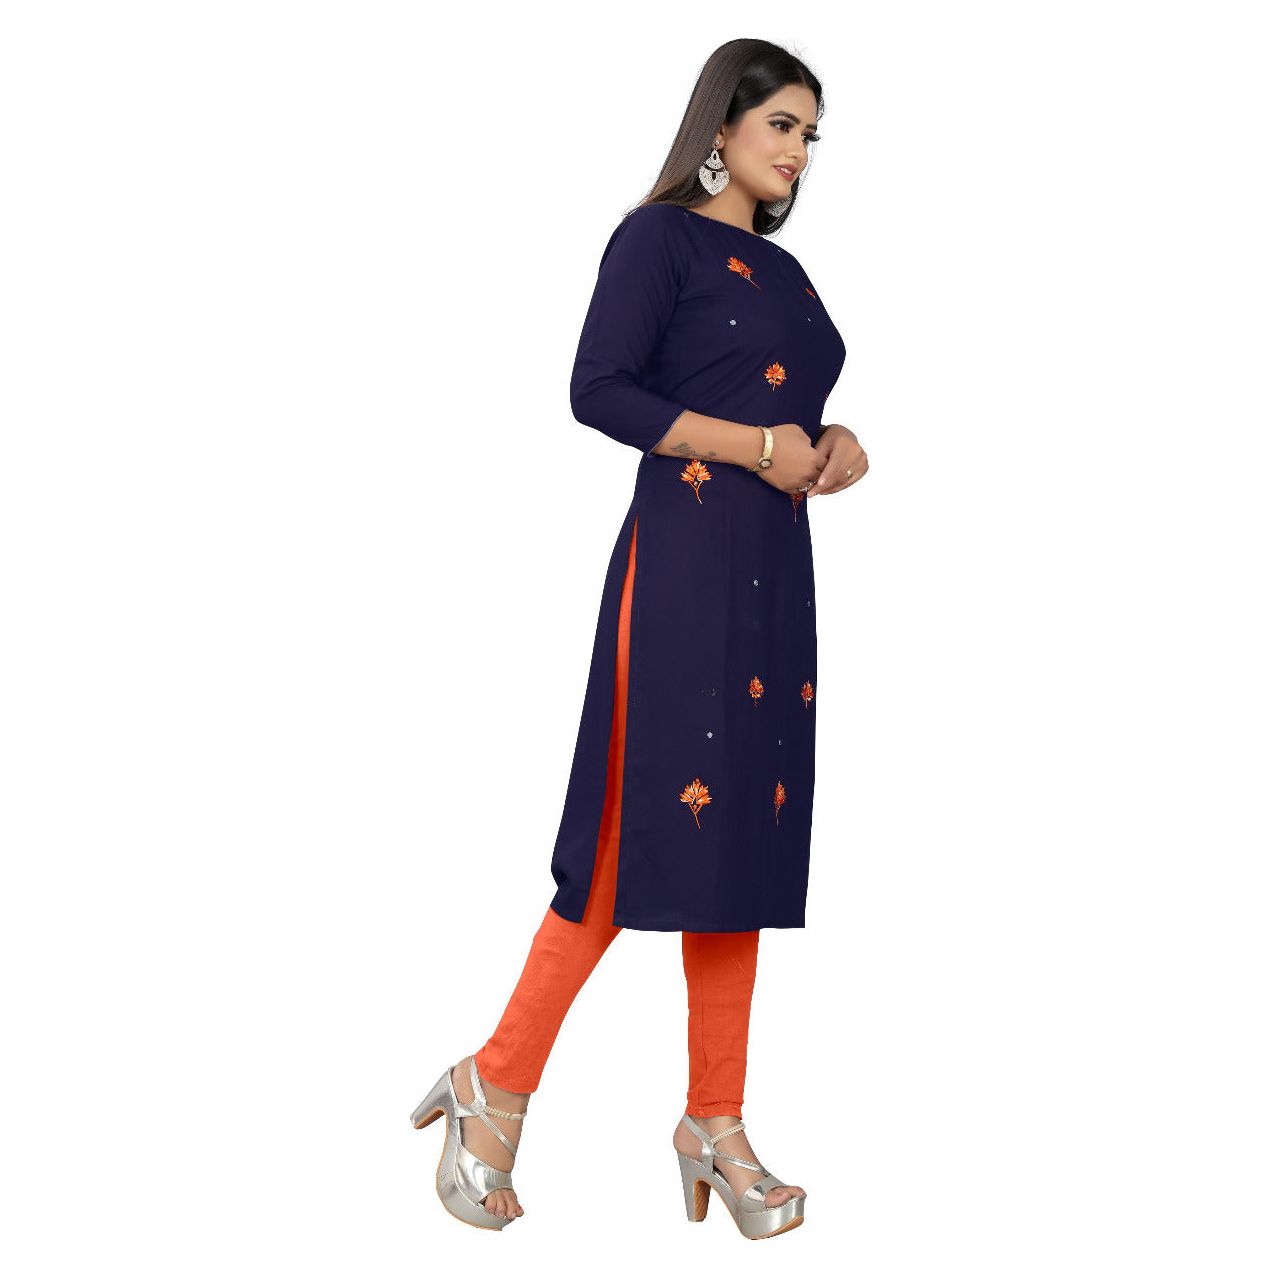 Indigo A line IndianTunic Top Kurta for women with All over Orange Floral Embroidery